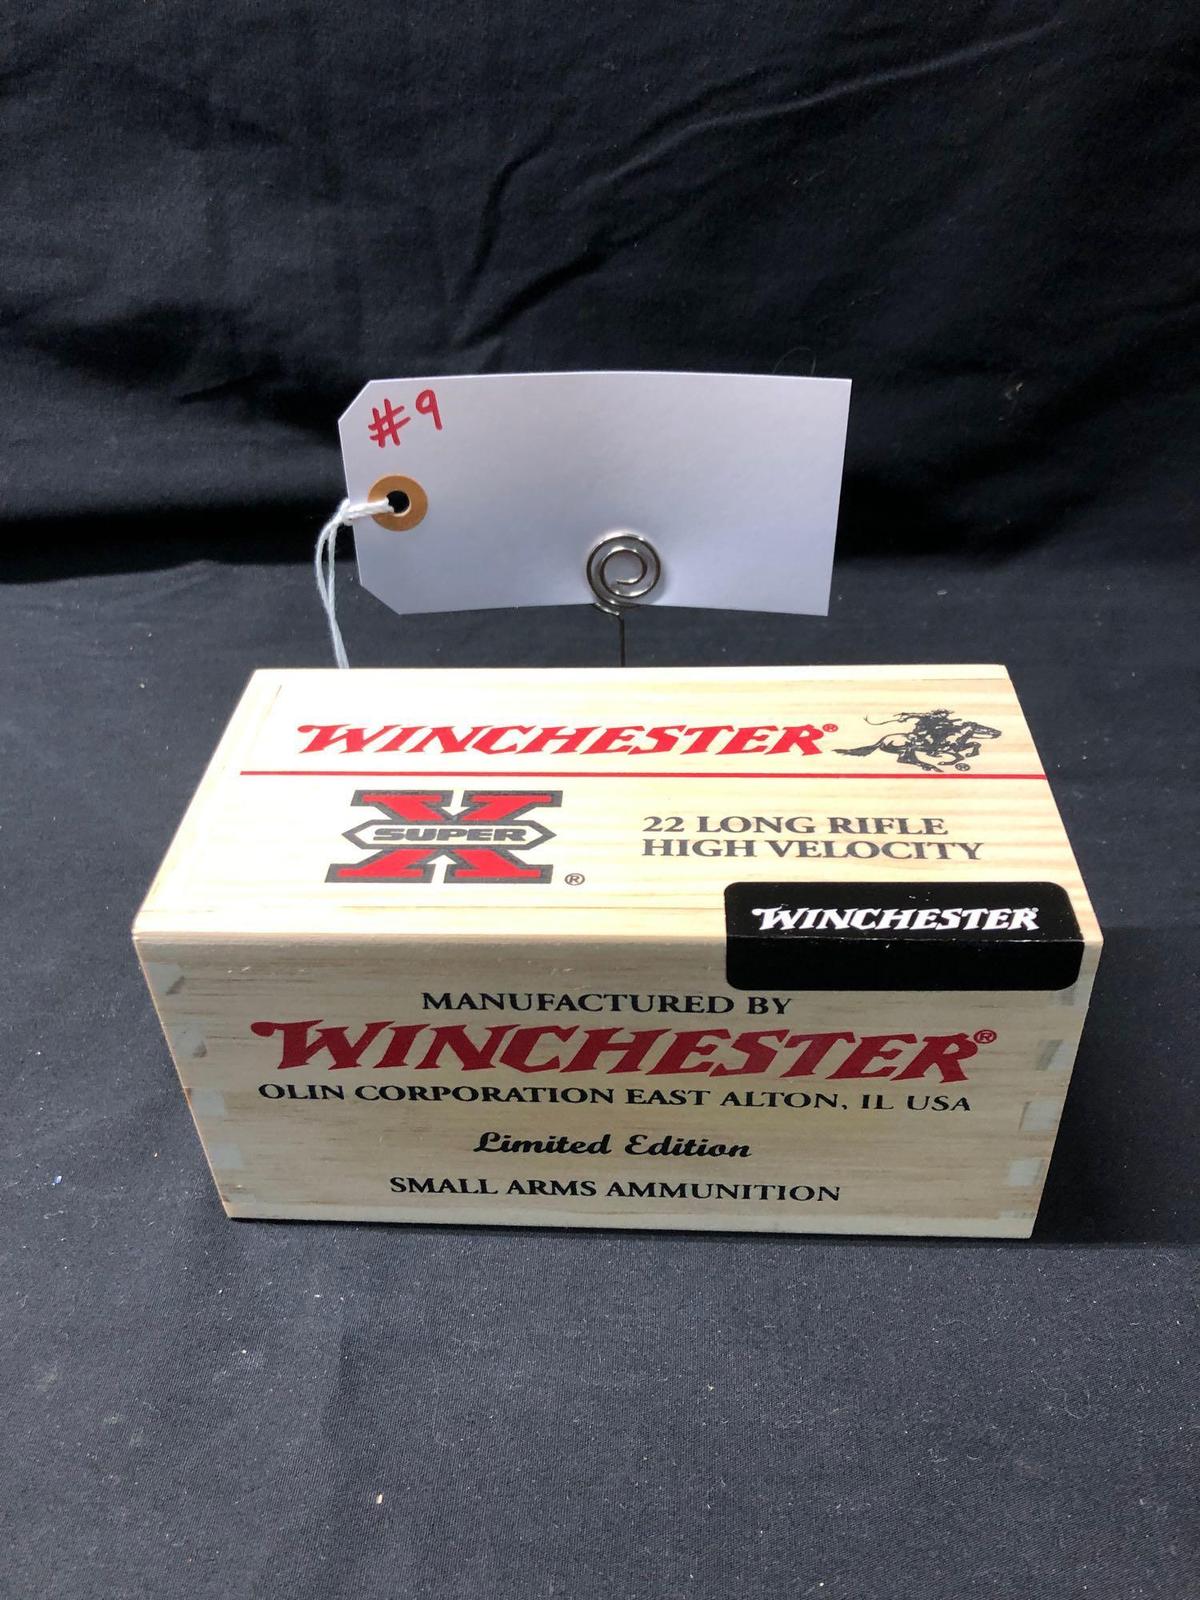 WINCHESTER LIMITED EDITION IN WOODEN BOX, 22 CAL, 500 ROUND (X1)